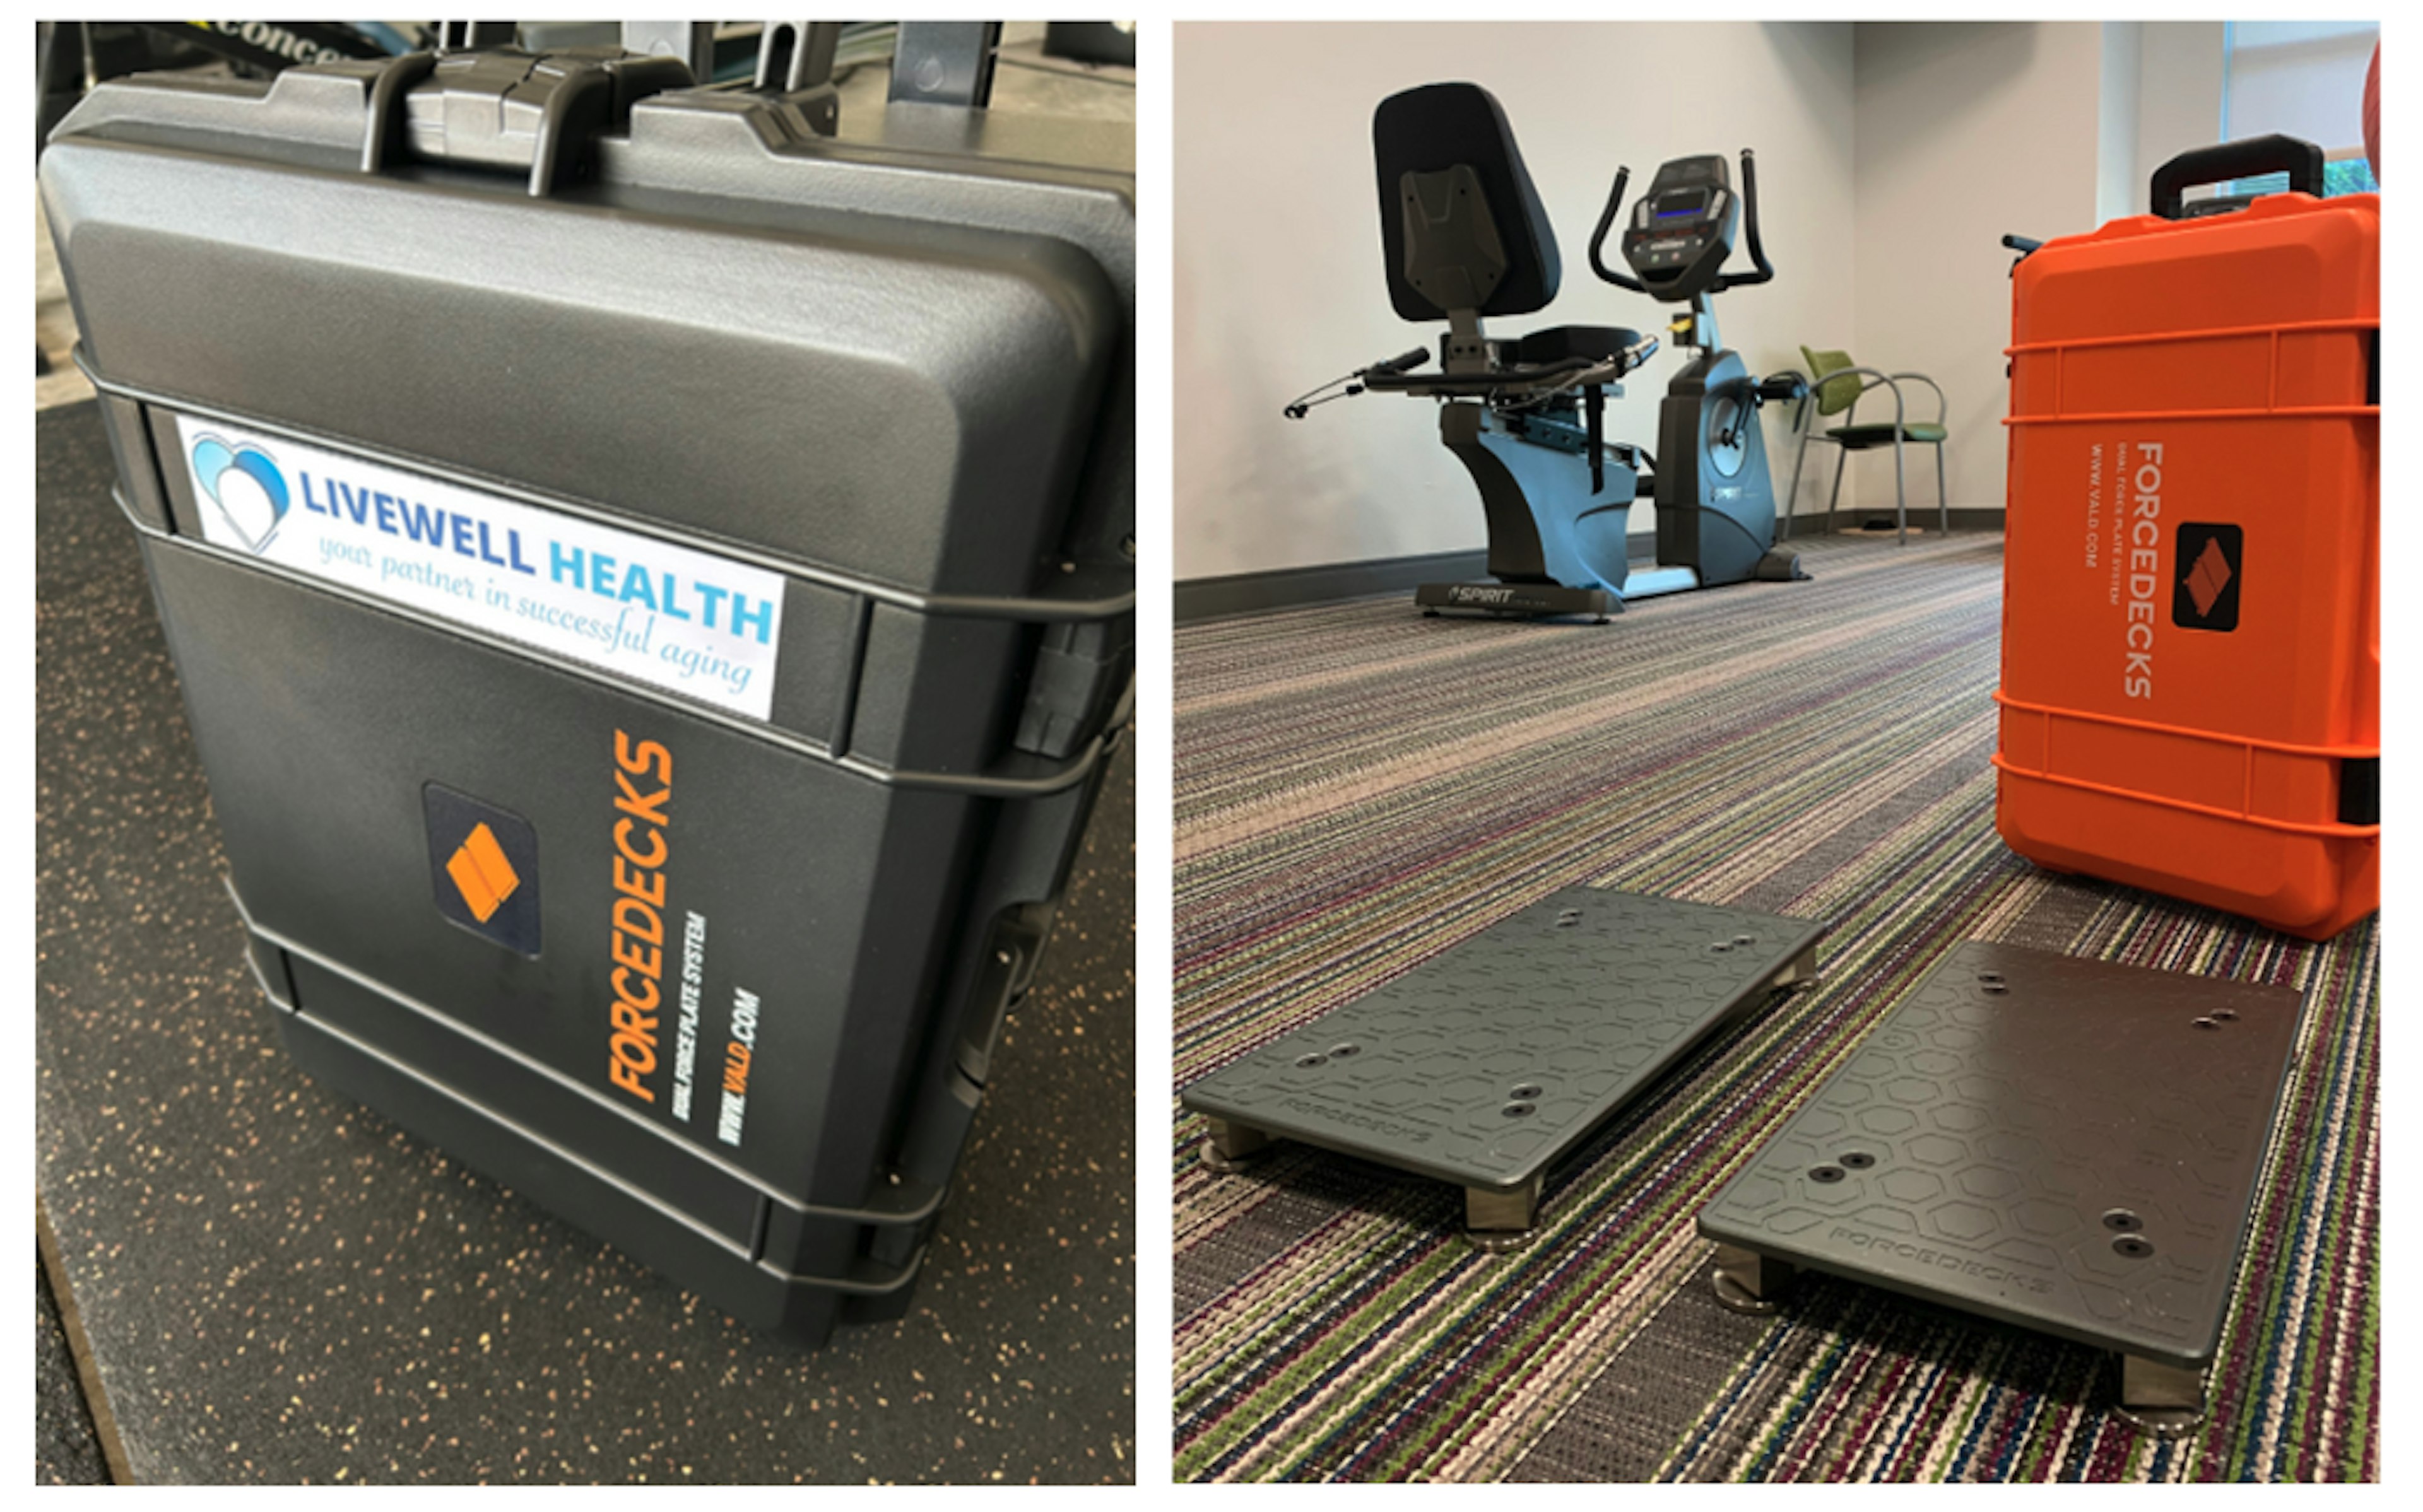 VALD ForceDecks being easily transported around the State of Florida by LiveWell Health's exercise physiologists to test their members.